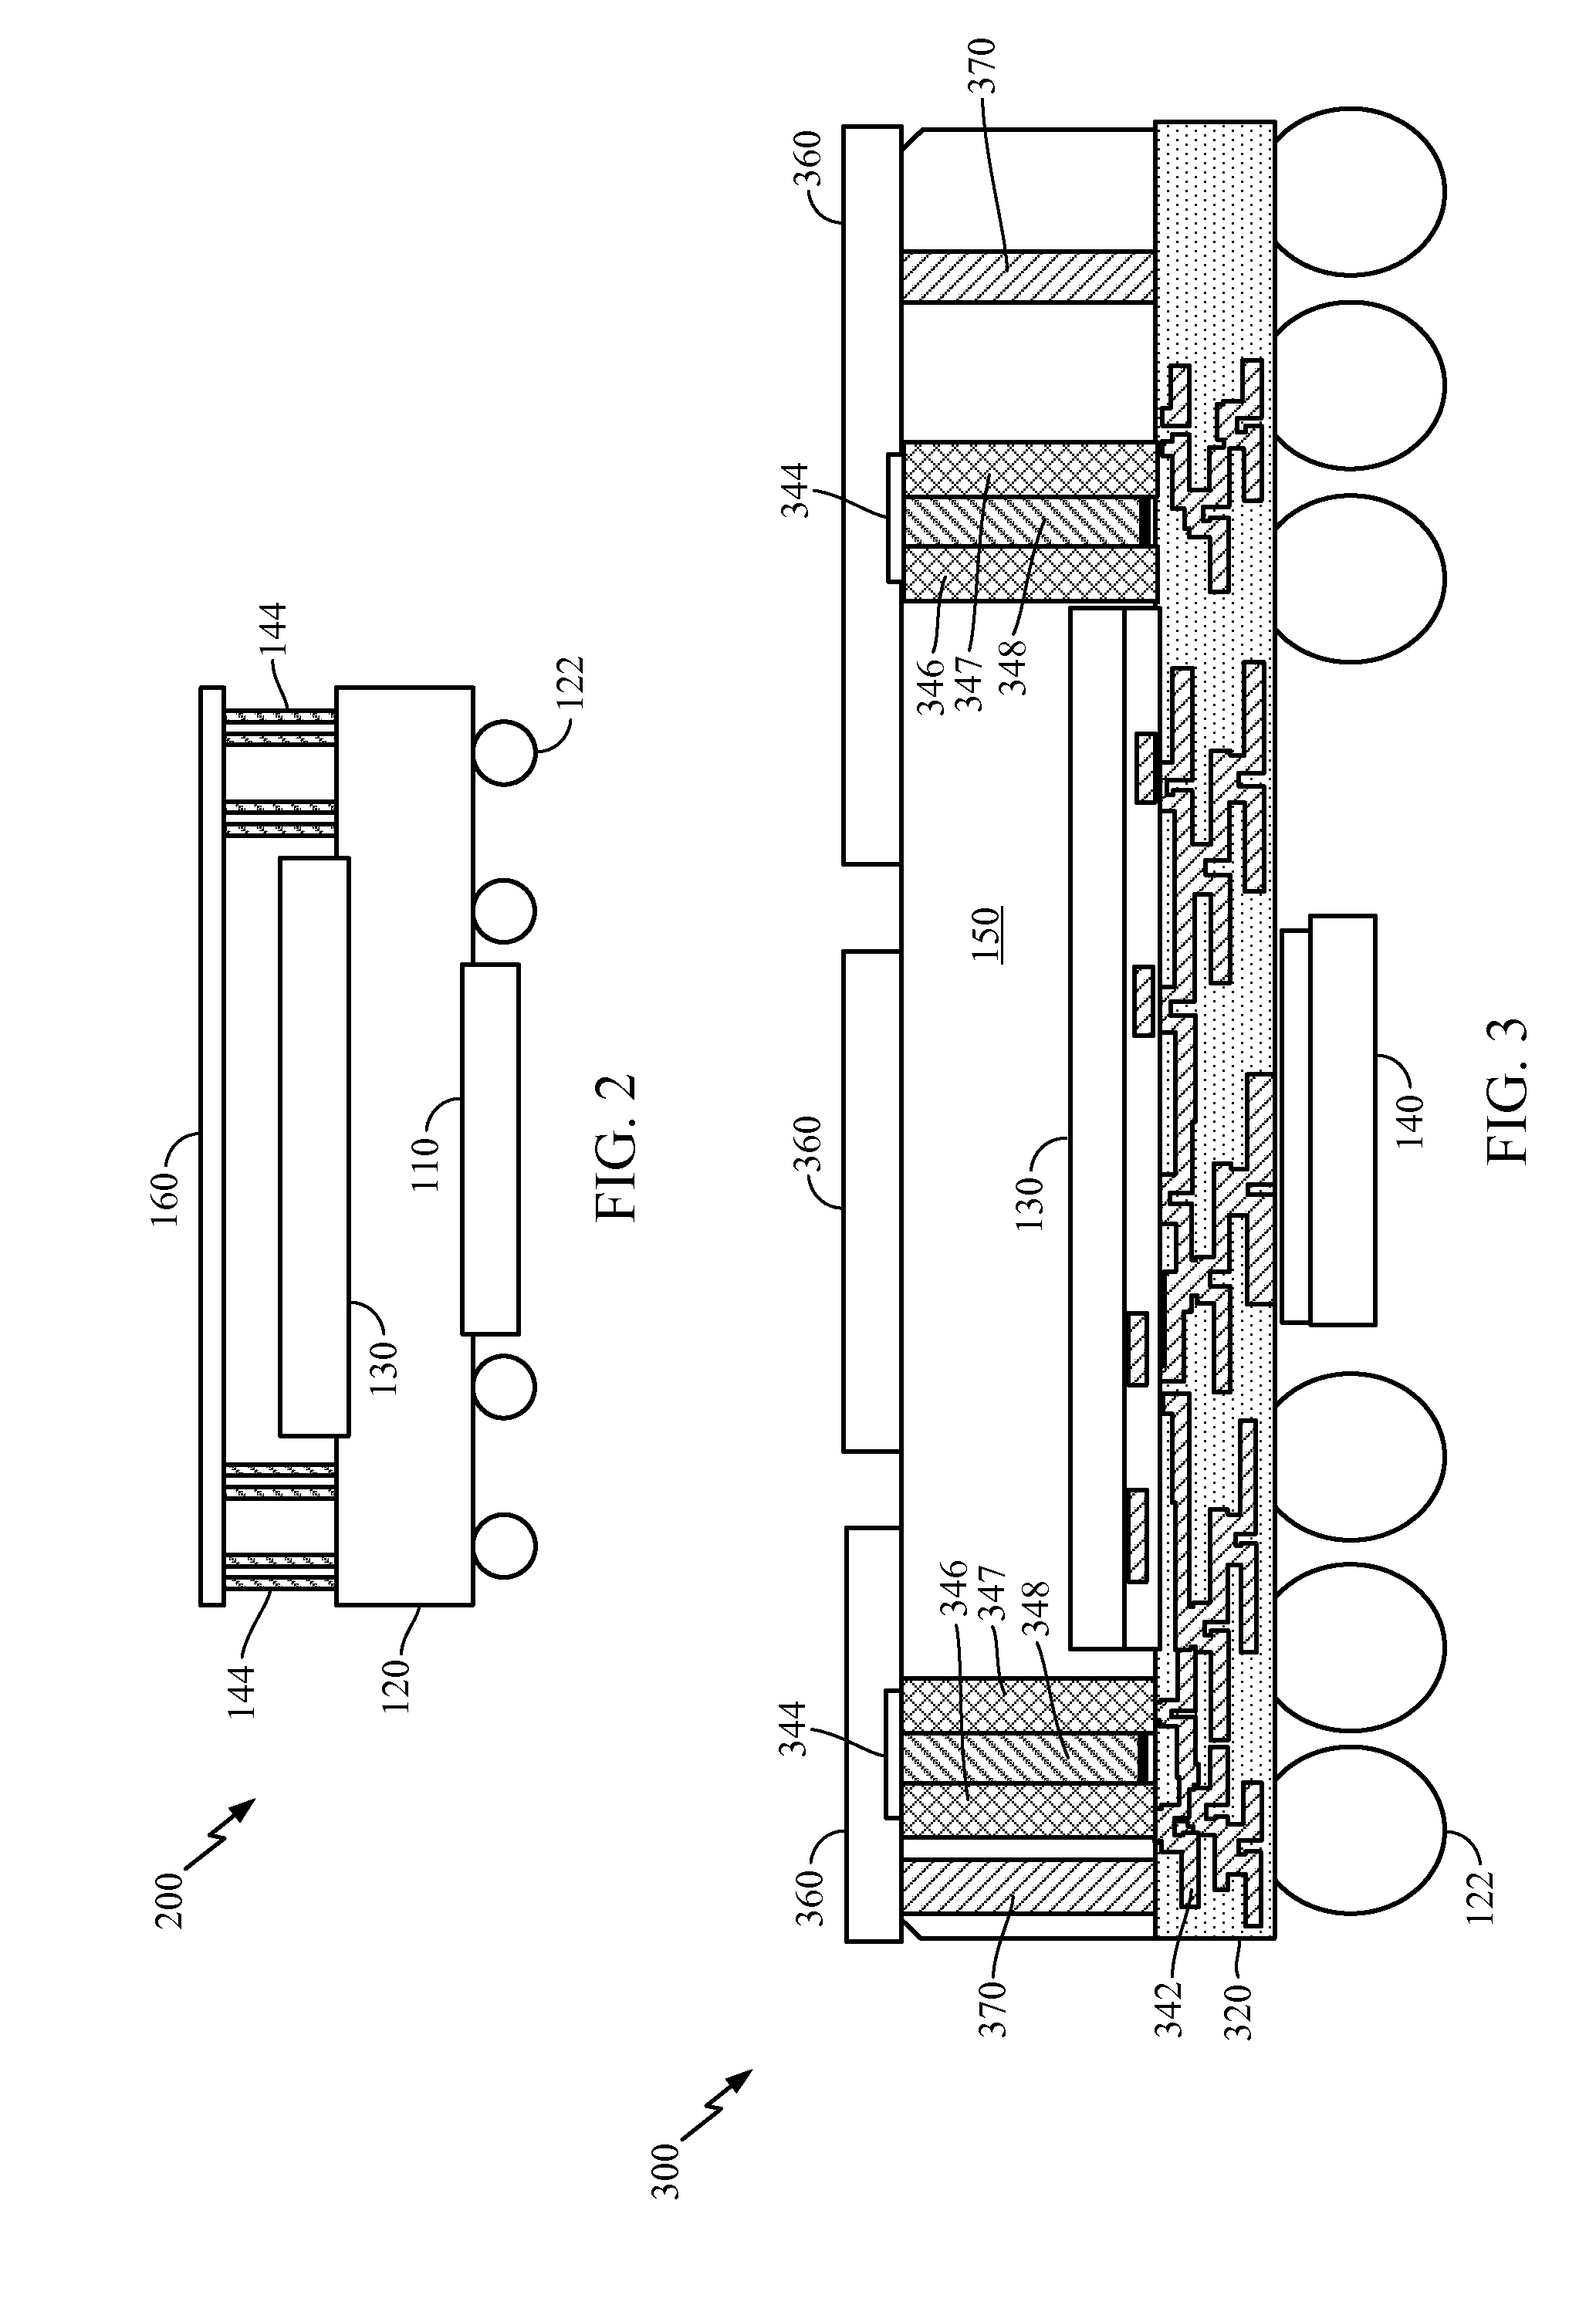 Semiconductor package with incorporated inductance element